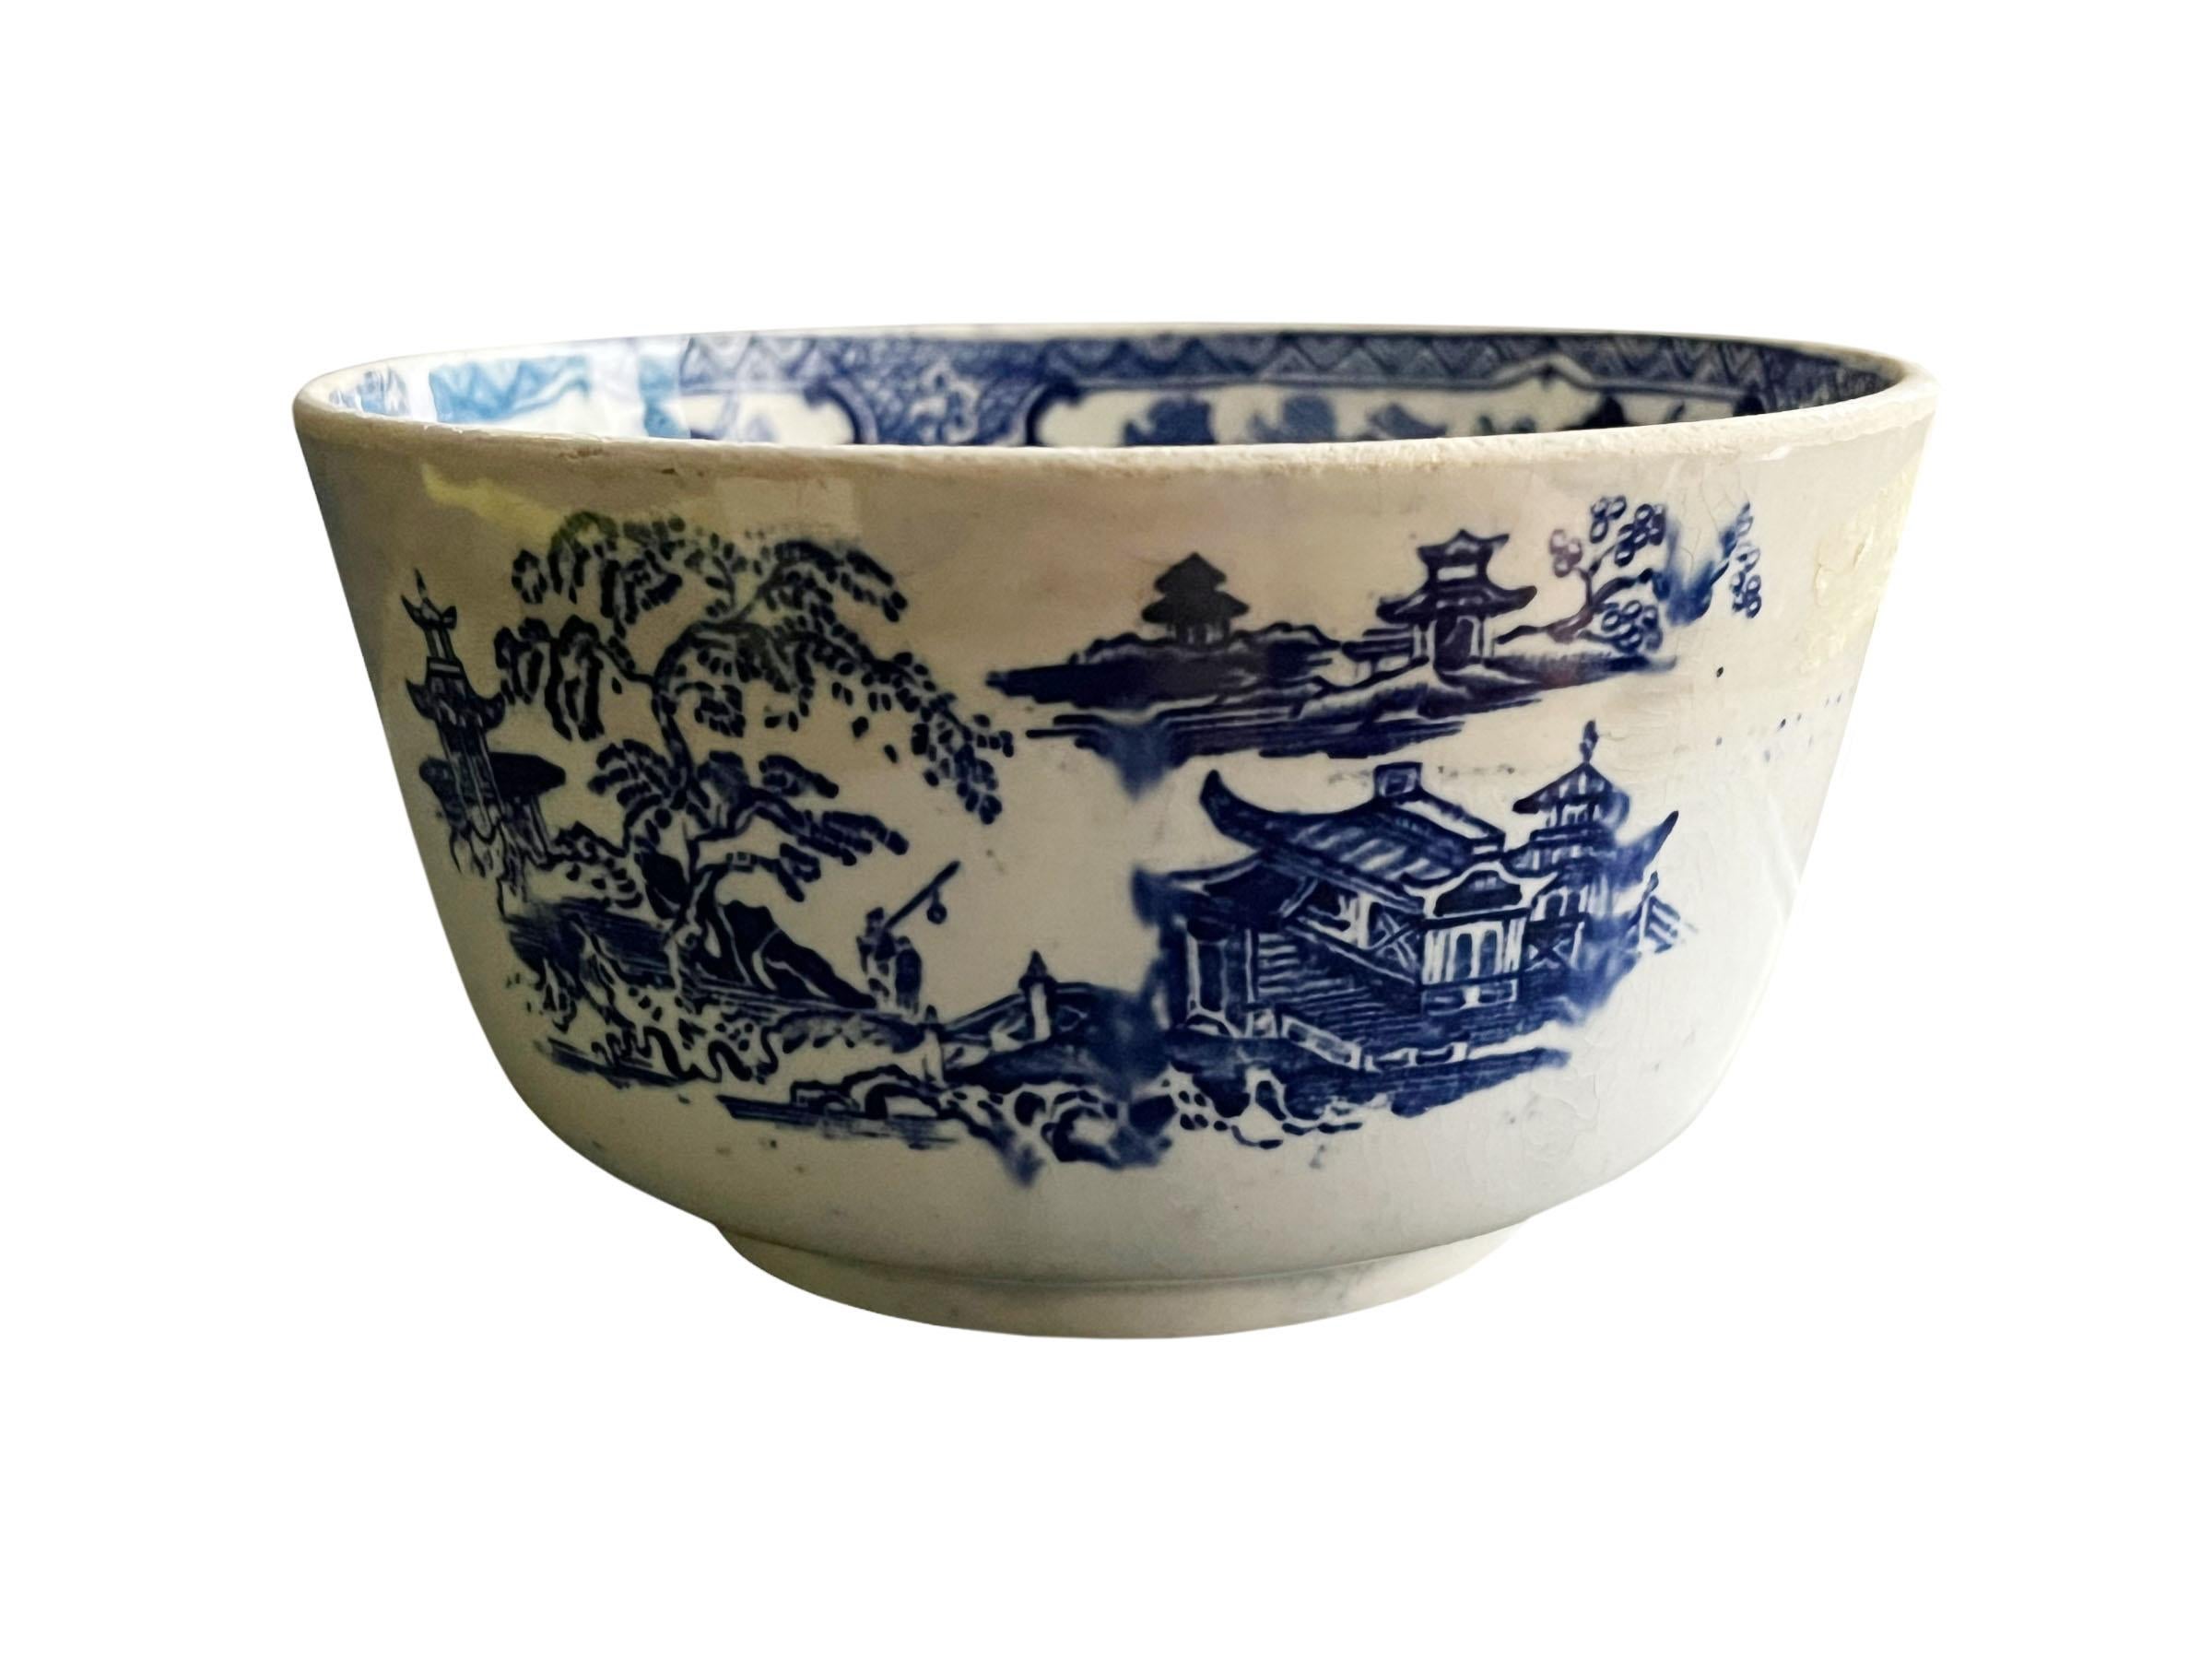 A small deep antique Adams & Company ironstone bowl with a Japanese scene painted in blurred tones of cobalt blue. The interior has the design around the top. Lots of signs of ware make this an even more precious piece.